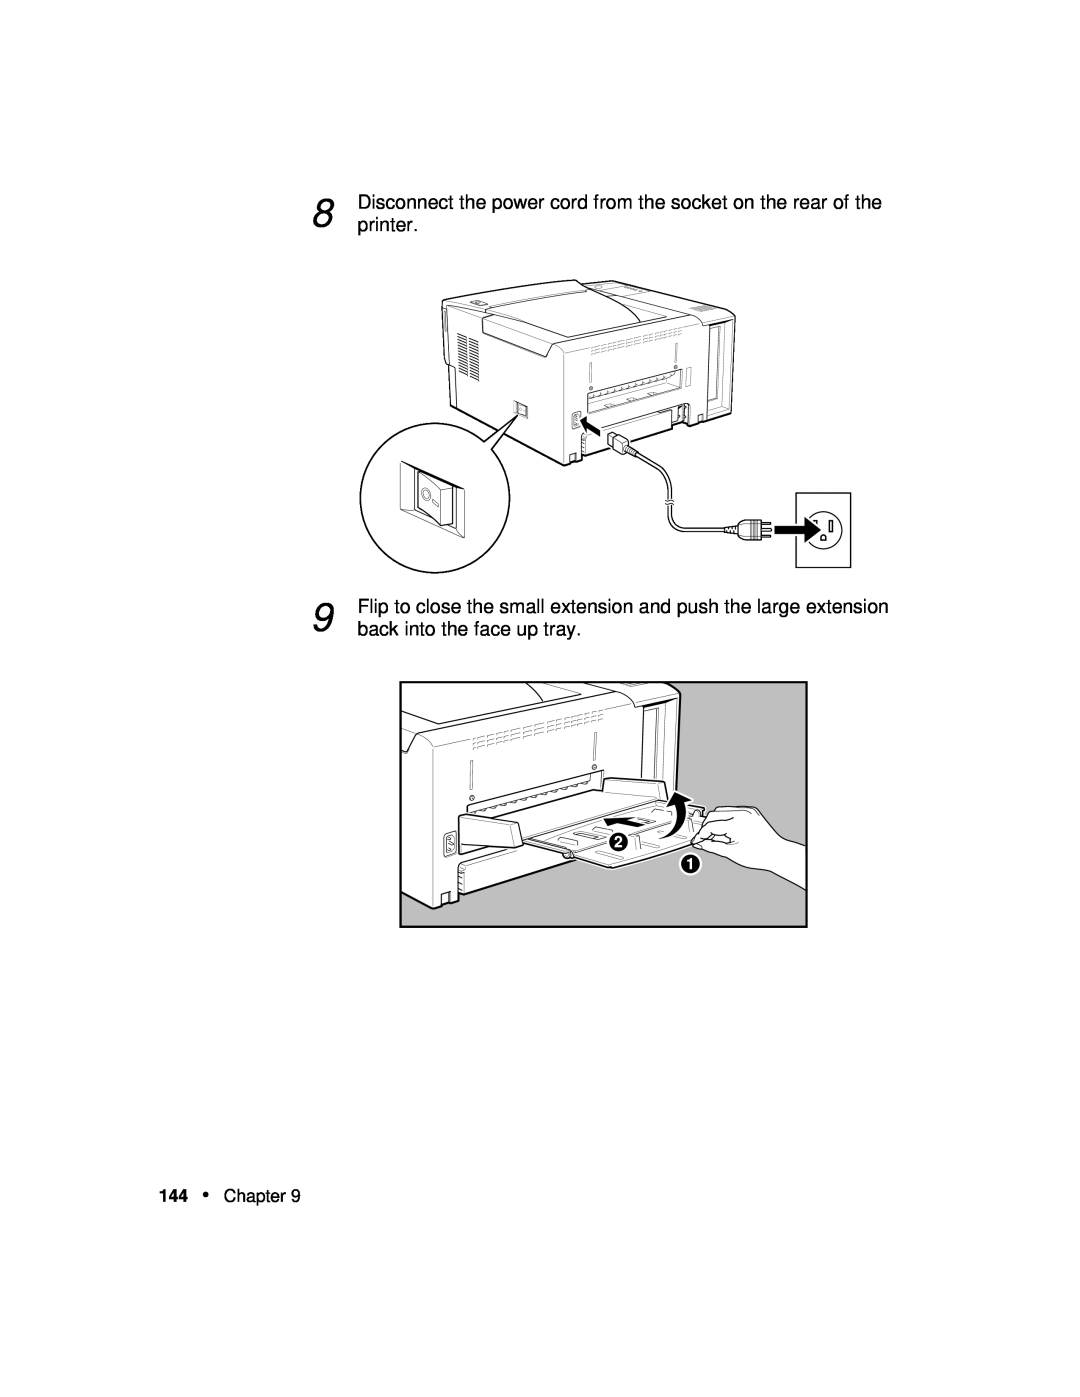 Xerox P12 manual Flip to close the small extension and push the large extension, back into the face up tray, Chapter 